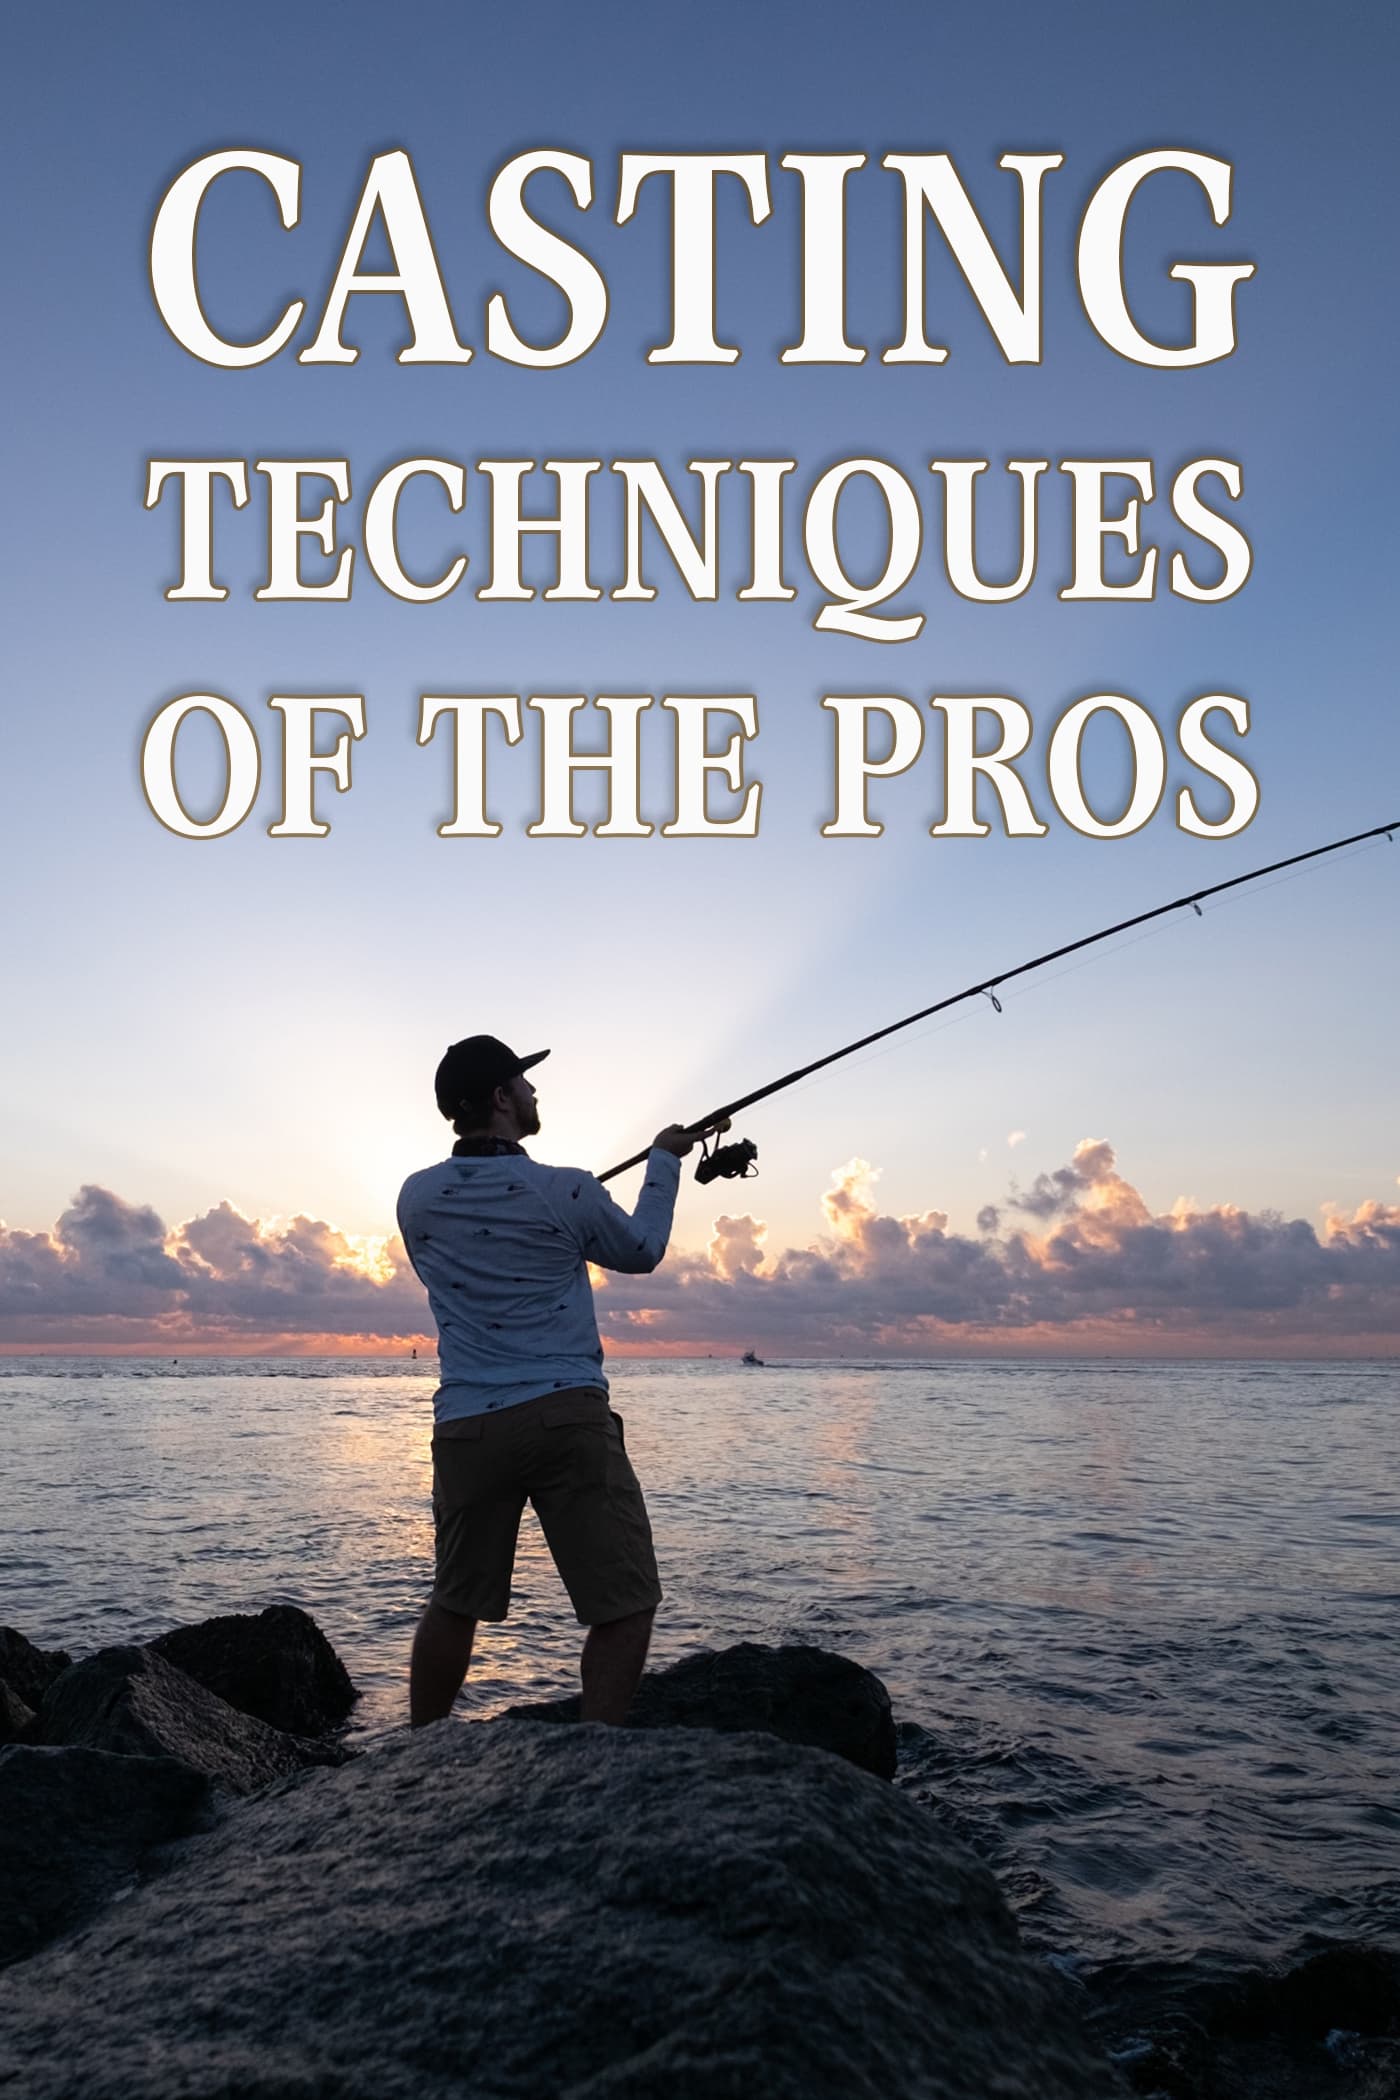 Casting Techniques of the Pros